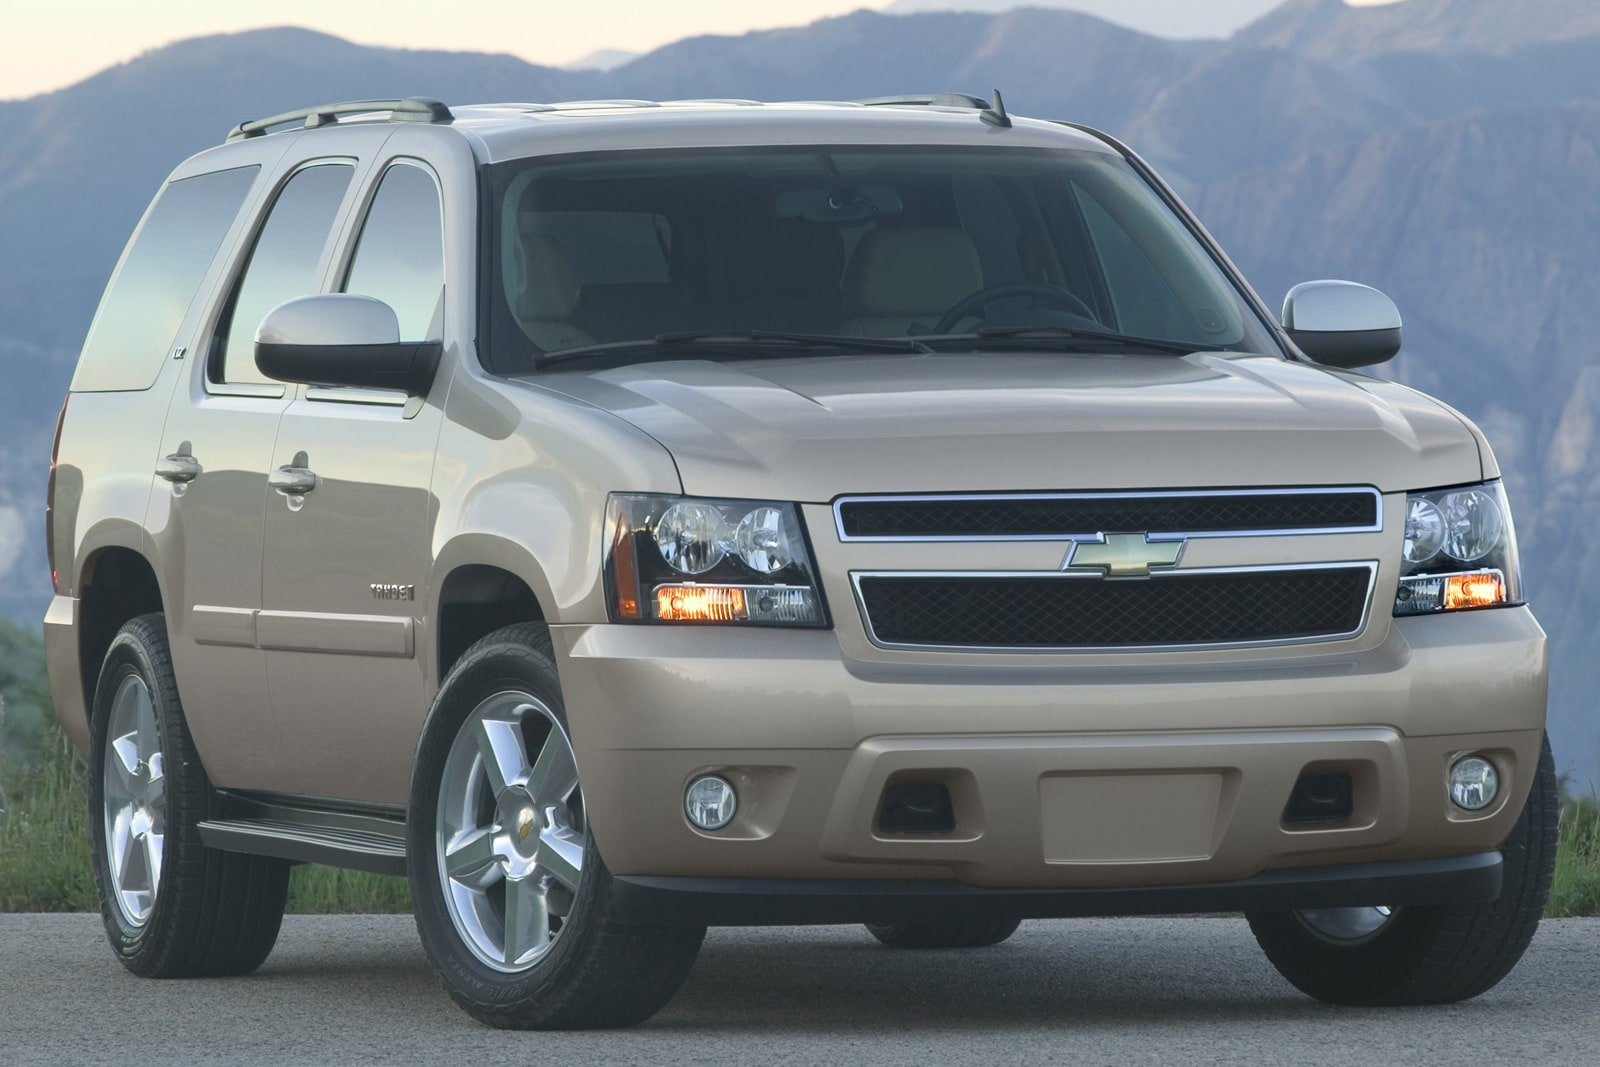 2007 Chevy Tahoe Review & Ratings | Edmunds